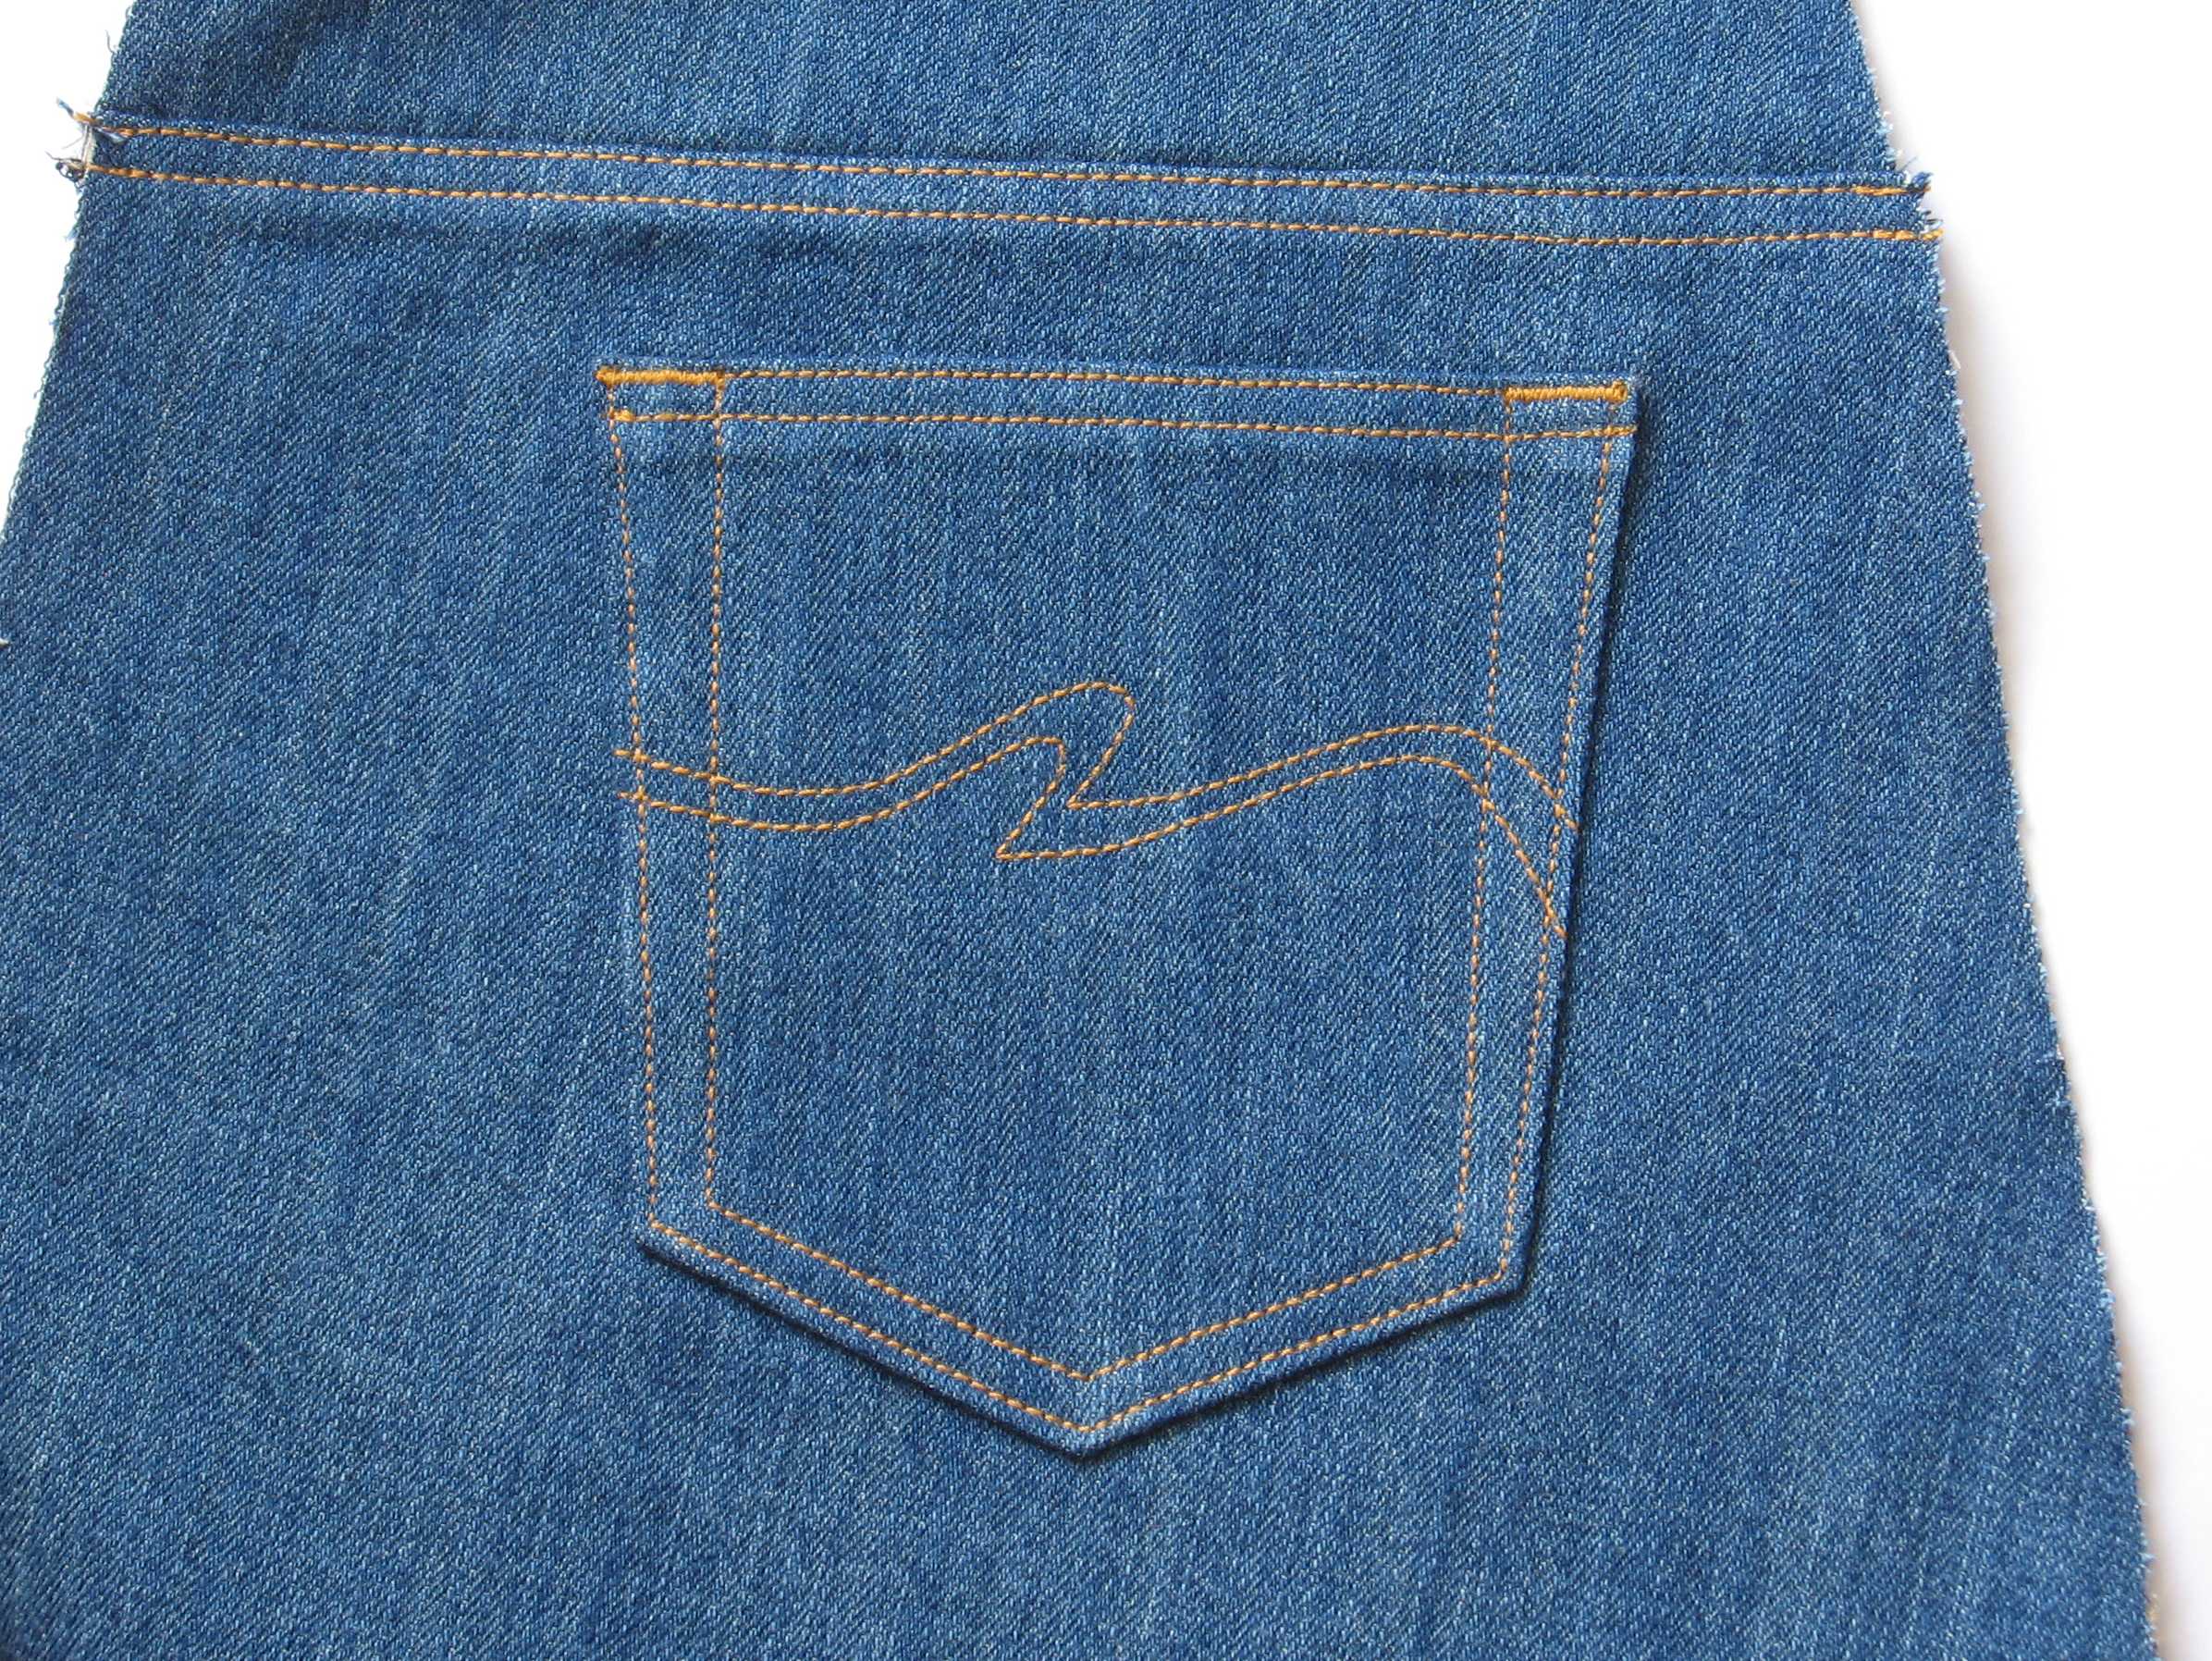 Finished back jeans pocket | Grow Your Own Clothes